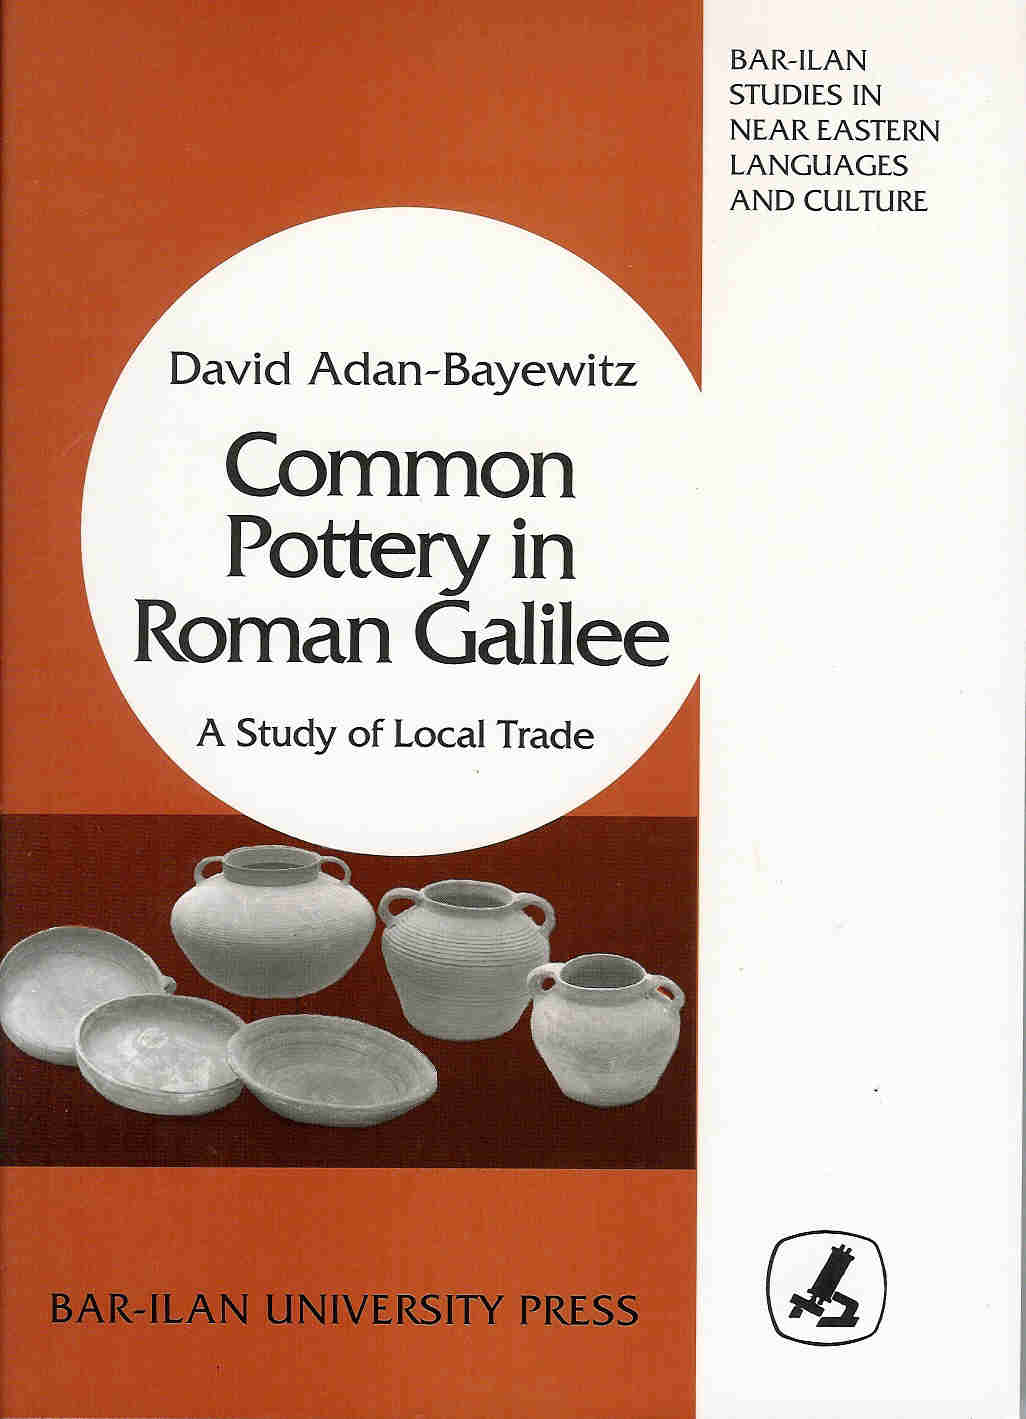 Common Pottery in Roman Galilee